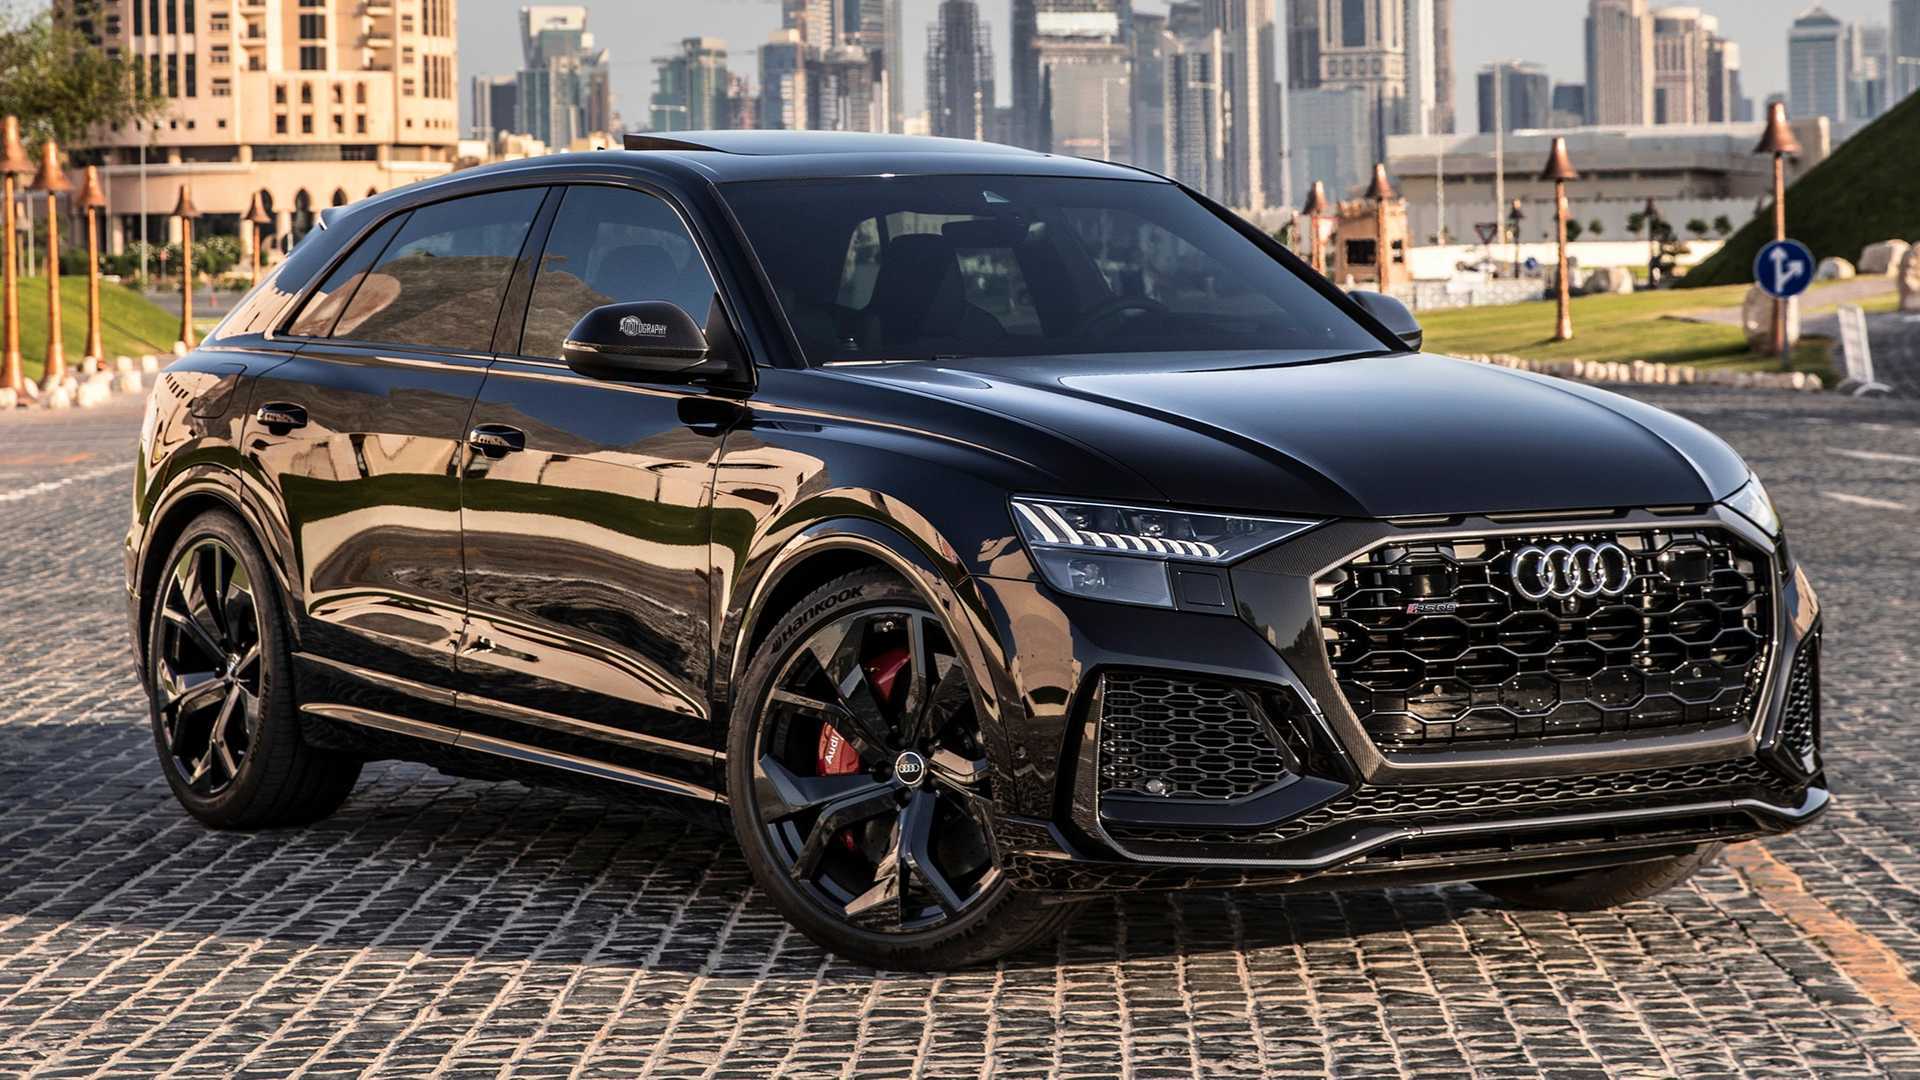 bao lebron james surprised the world when he gave bronny james an audi rs q to congratulate him on his first nba title and his th birthday 6536468dbef88 Lebron James Surprised The World When He Gave Bronny James An Audi Rs Q8 To Congratulate Him On His First Nba Title And His 18th Birthday.